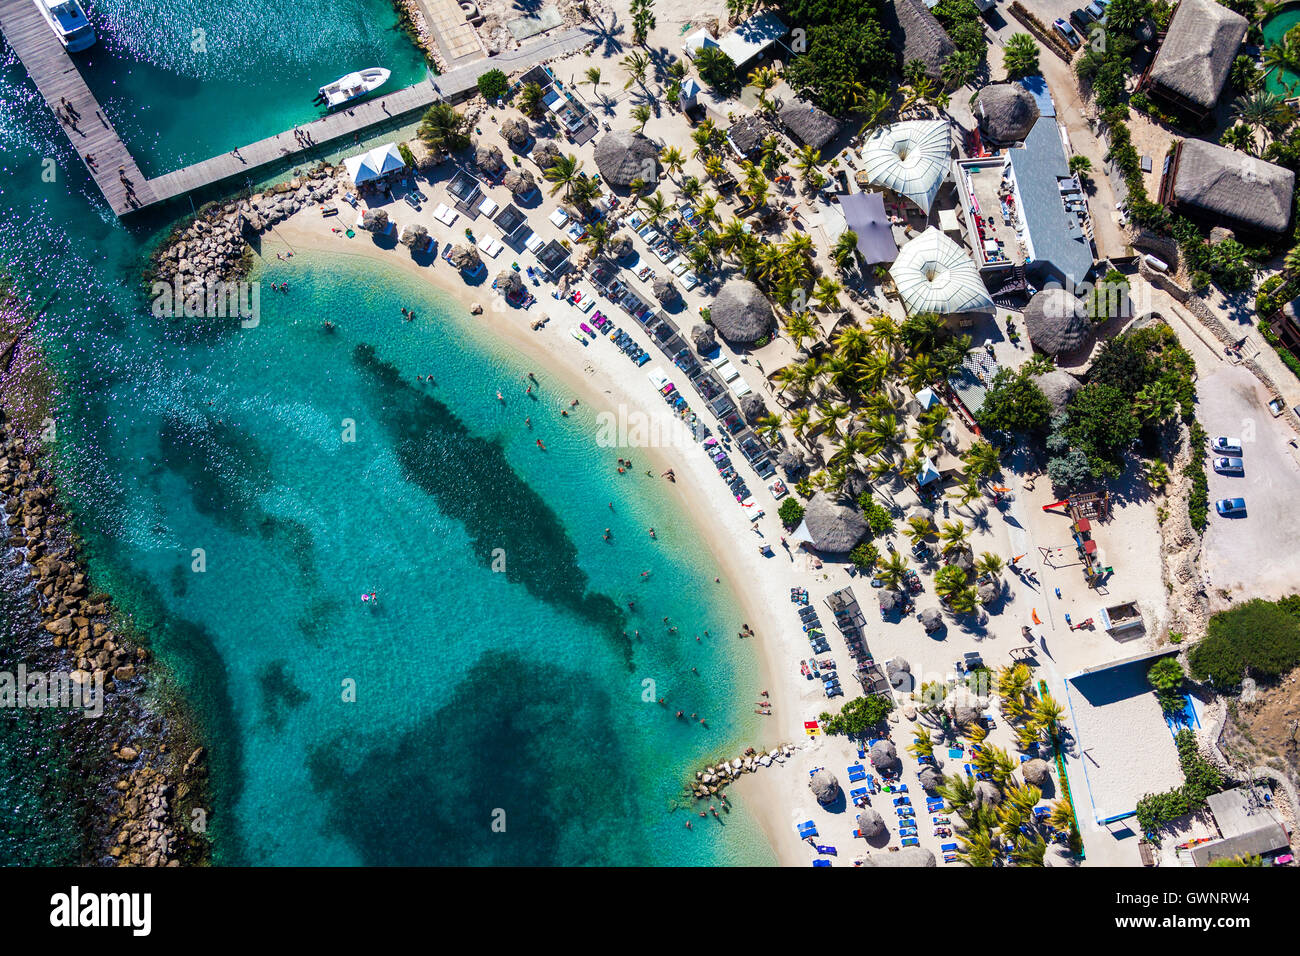 Aerial View of Cabana Beach on the south coast of Curacao Stock Photo